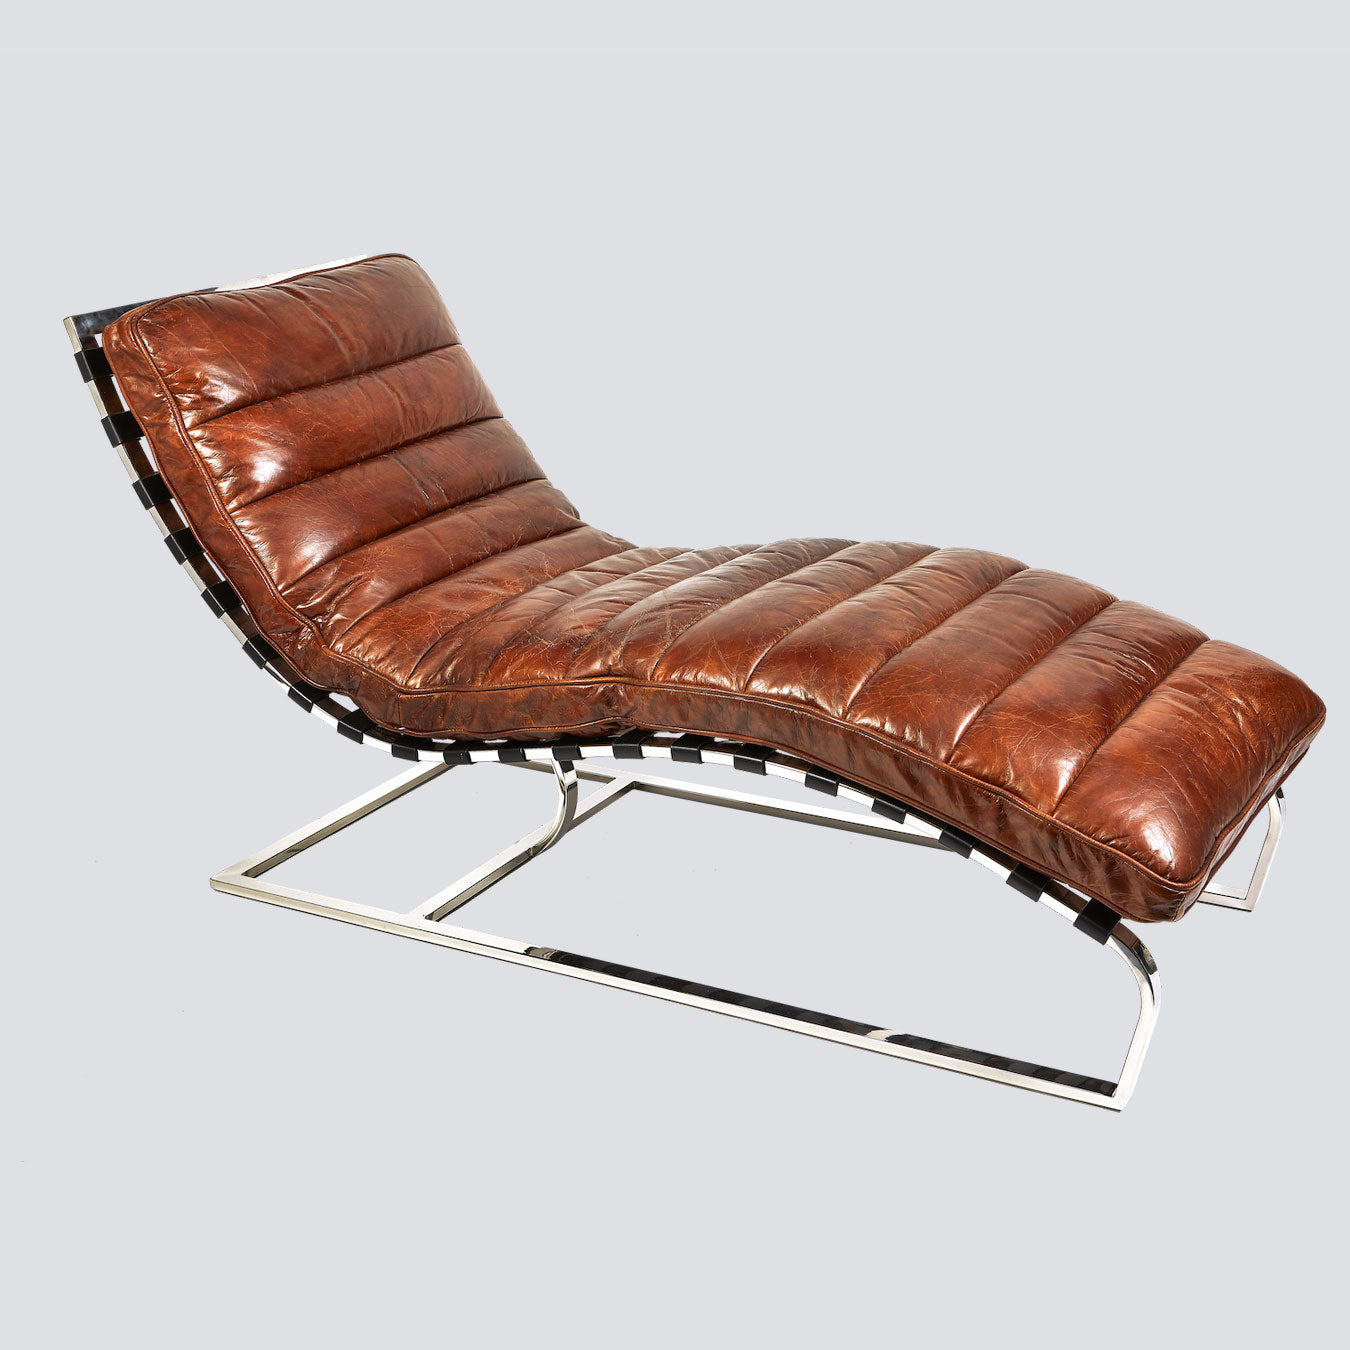 Cornell Lounger - Stainless Steel and Brown Brazilian Leather